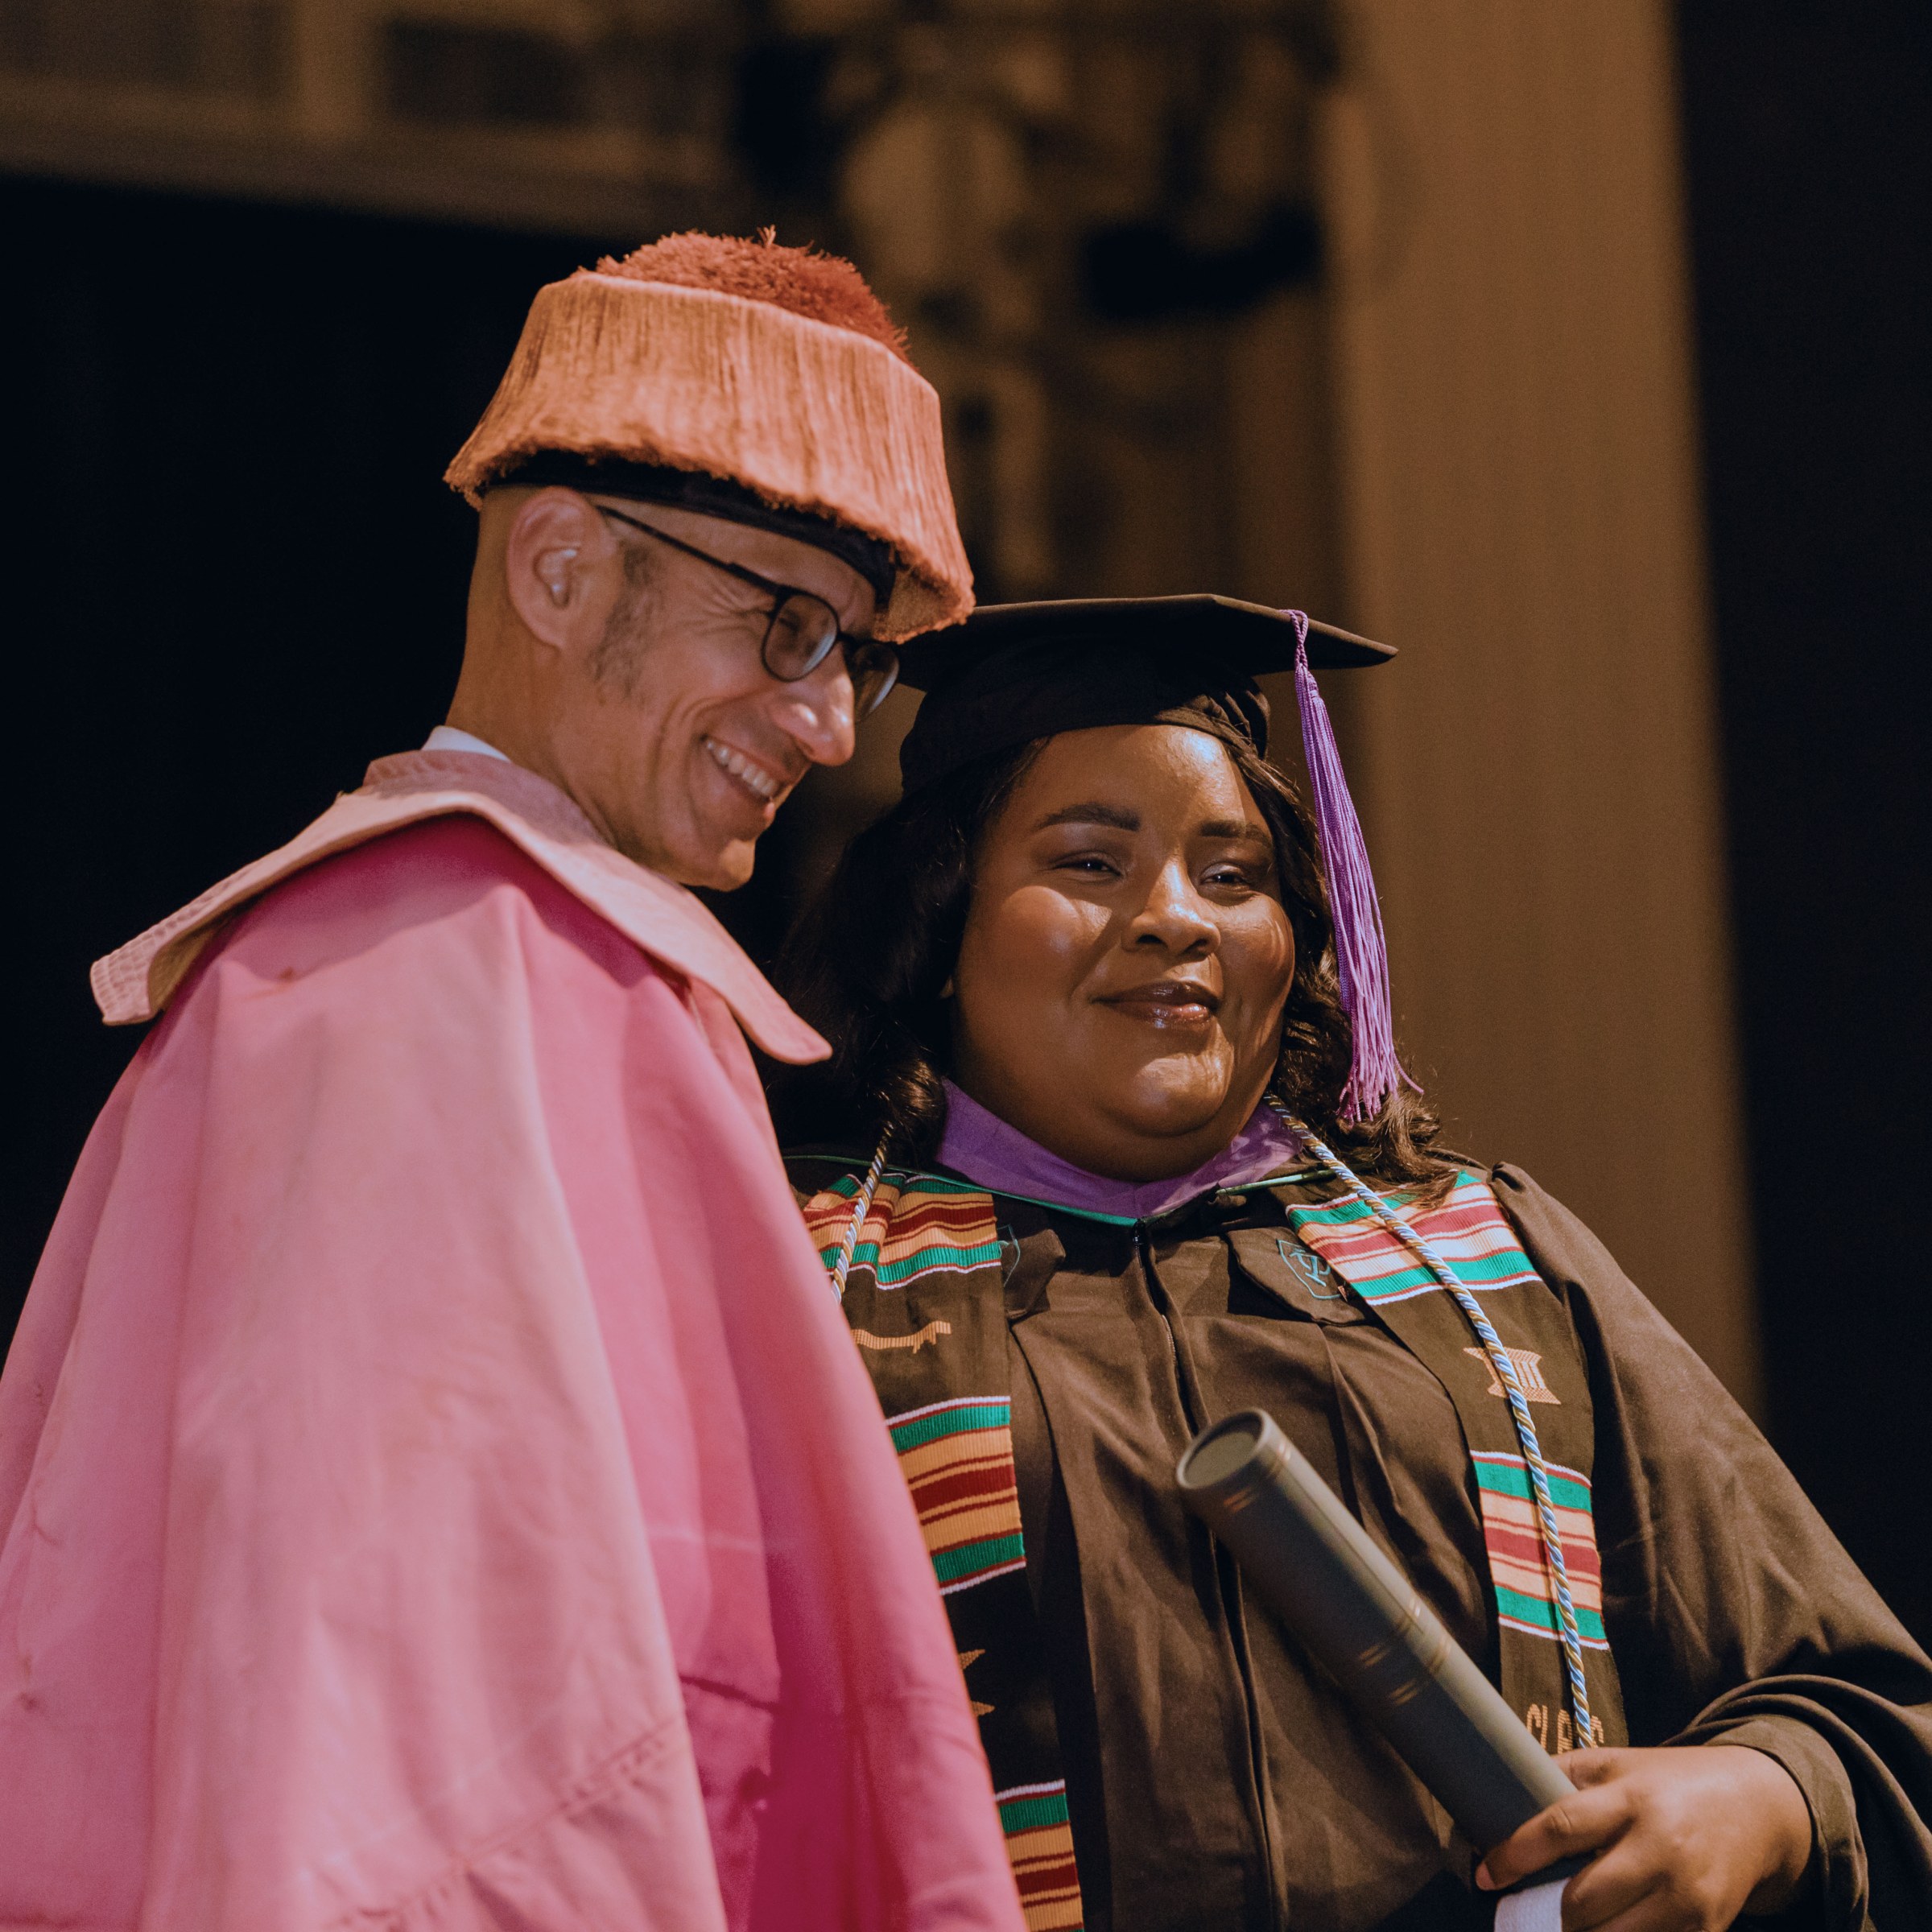 A professor and graduate in commencement regalia stand next to each other and pose for a photo at the ceremony, looking off camera.